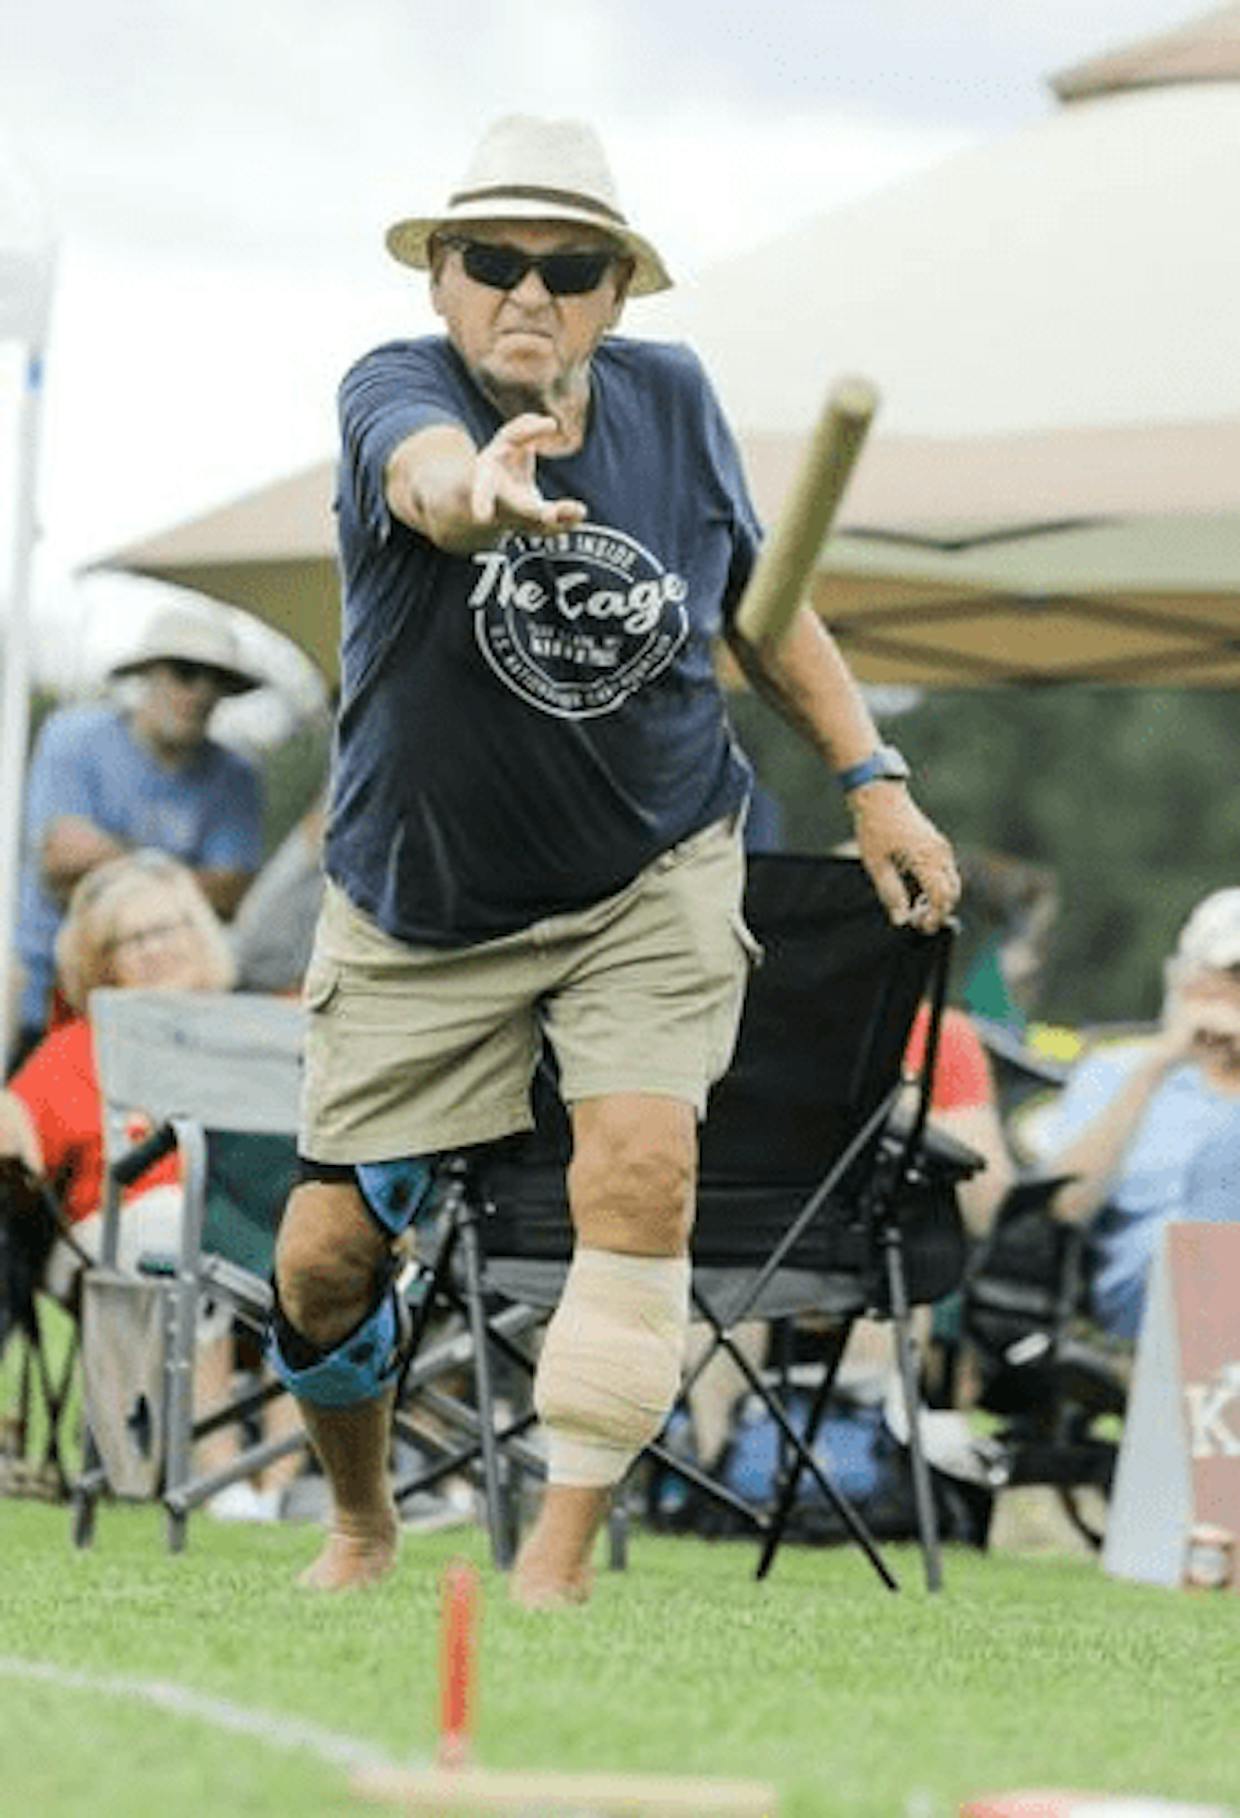 Dave Ellringer — a past national champ — competes at the U.S. National Kubb Championship in Eau Claire, Wisconsin, this month. His team finished third out of 128 teams.